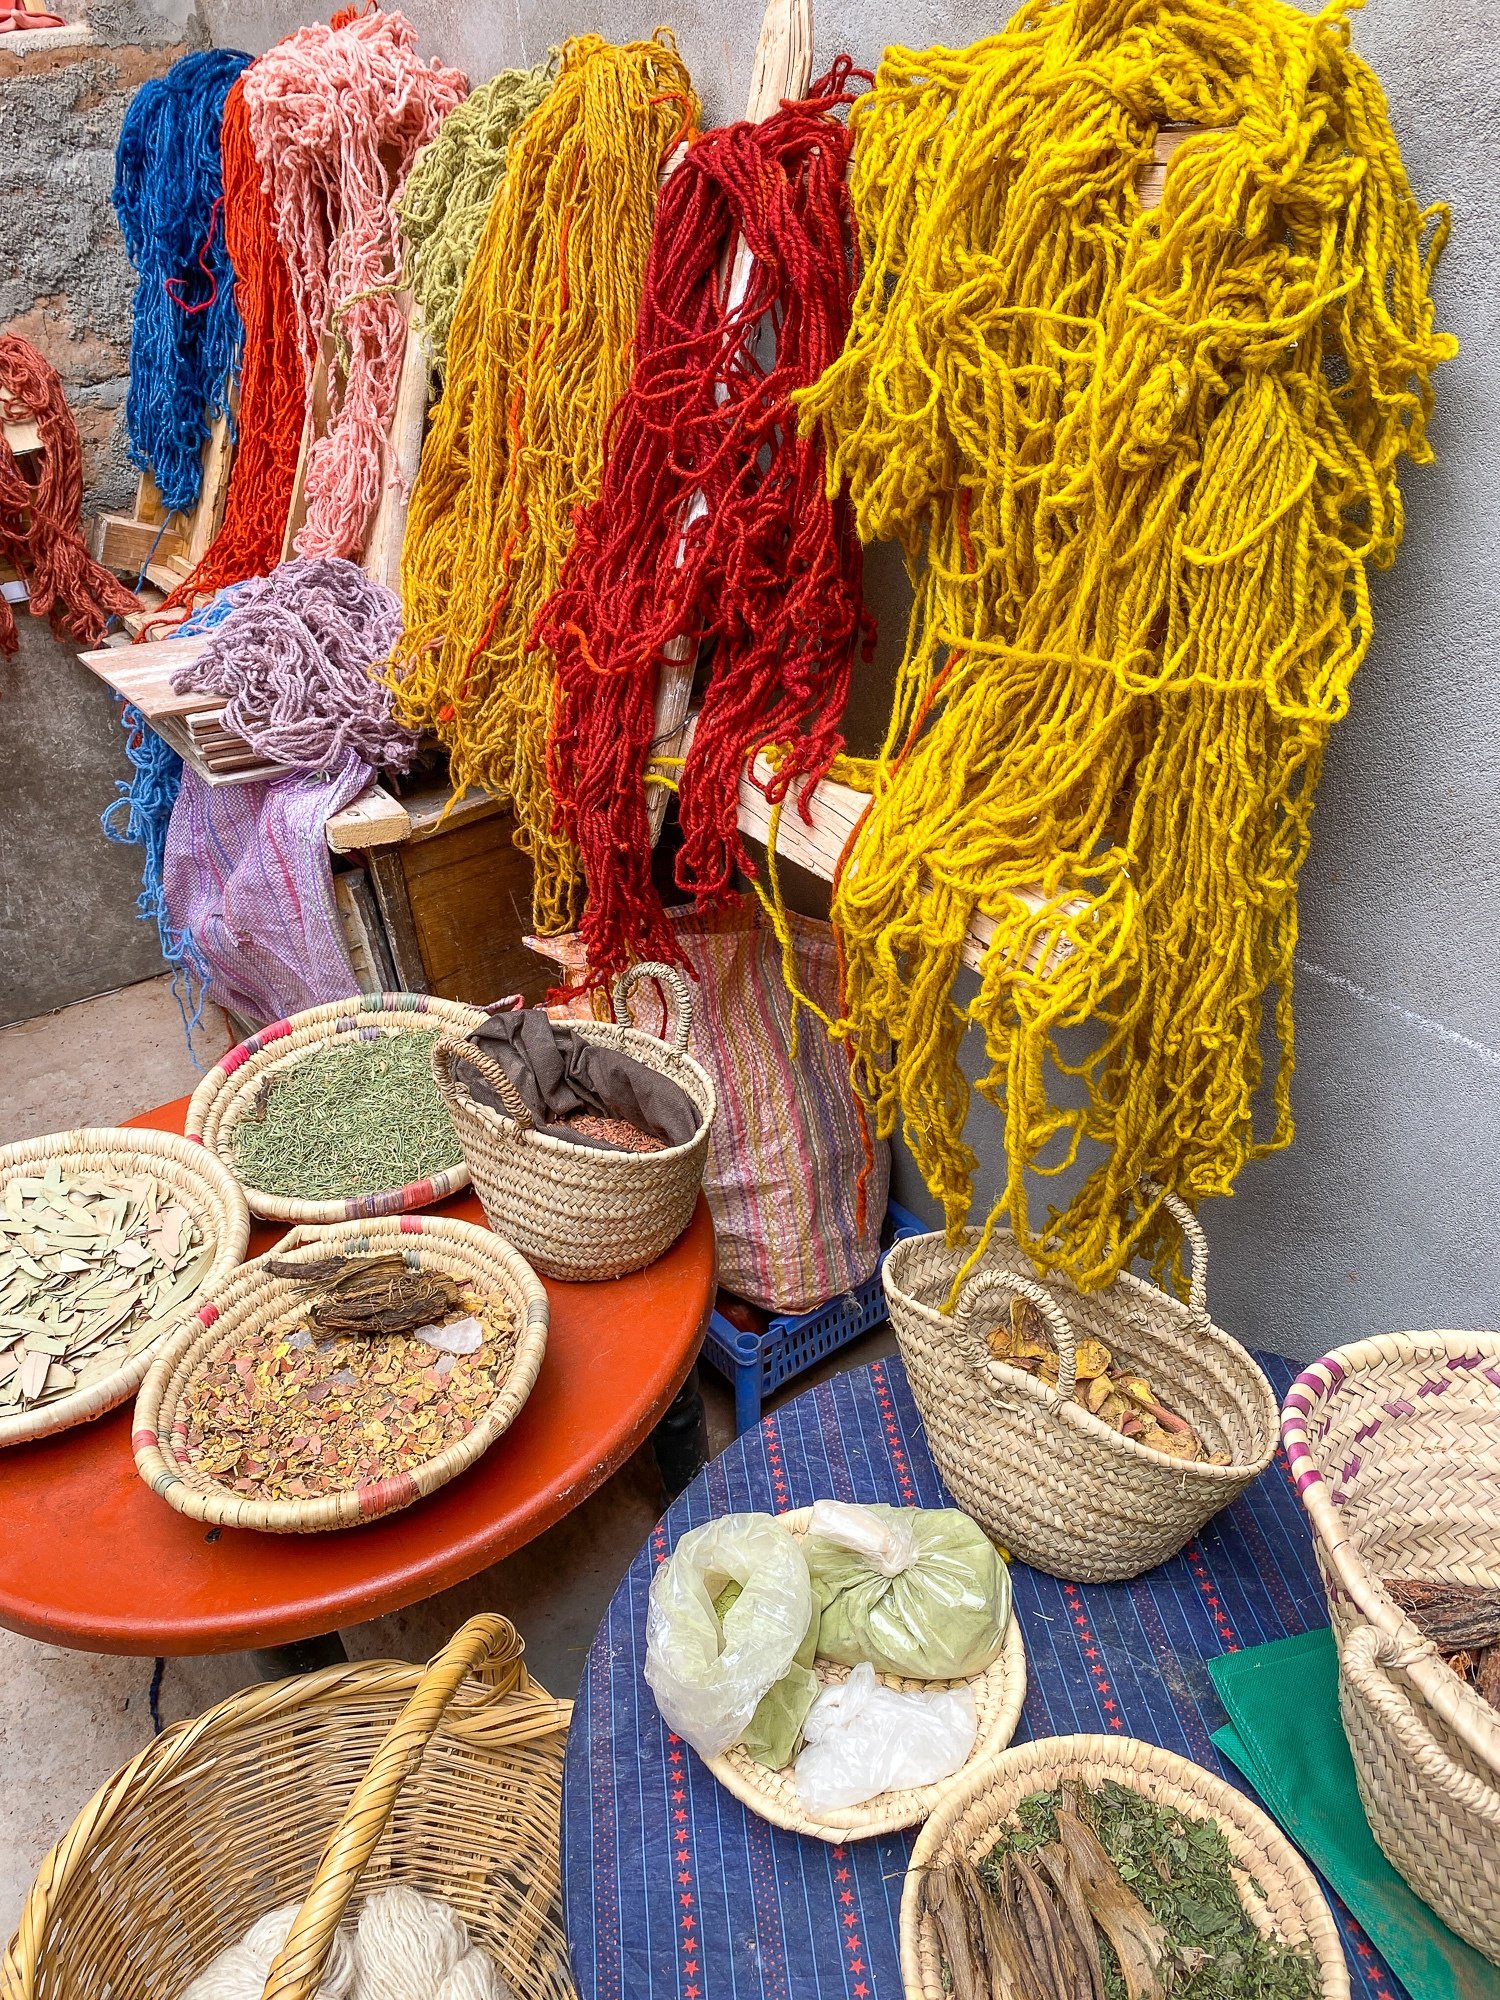 Naturally dyed yarn at Aknif Glaoui co-op in Aït Ben Haddou 